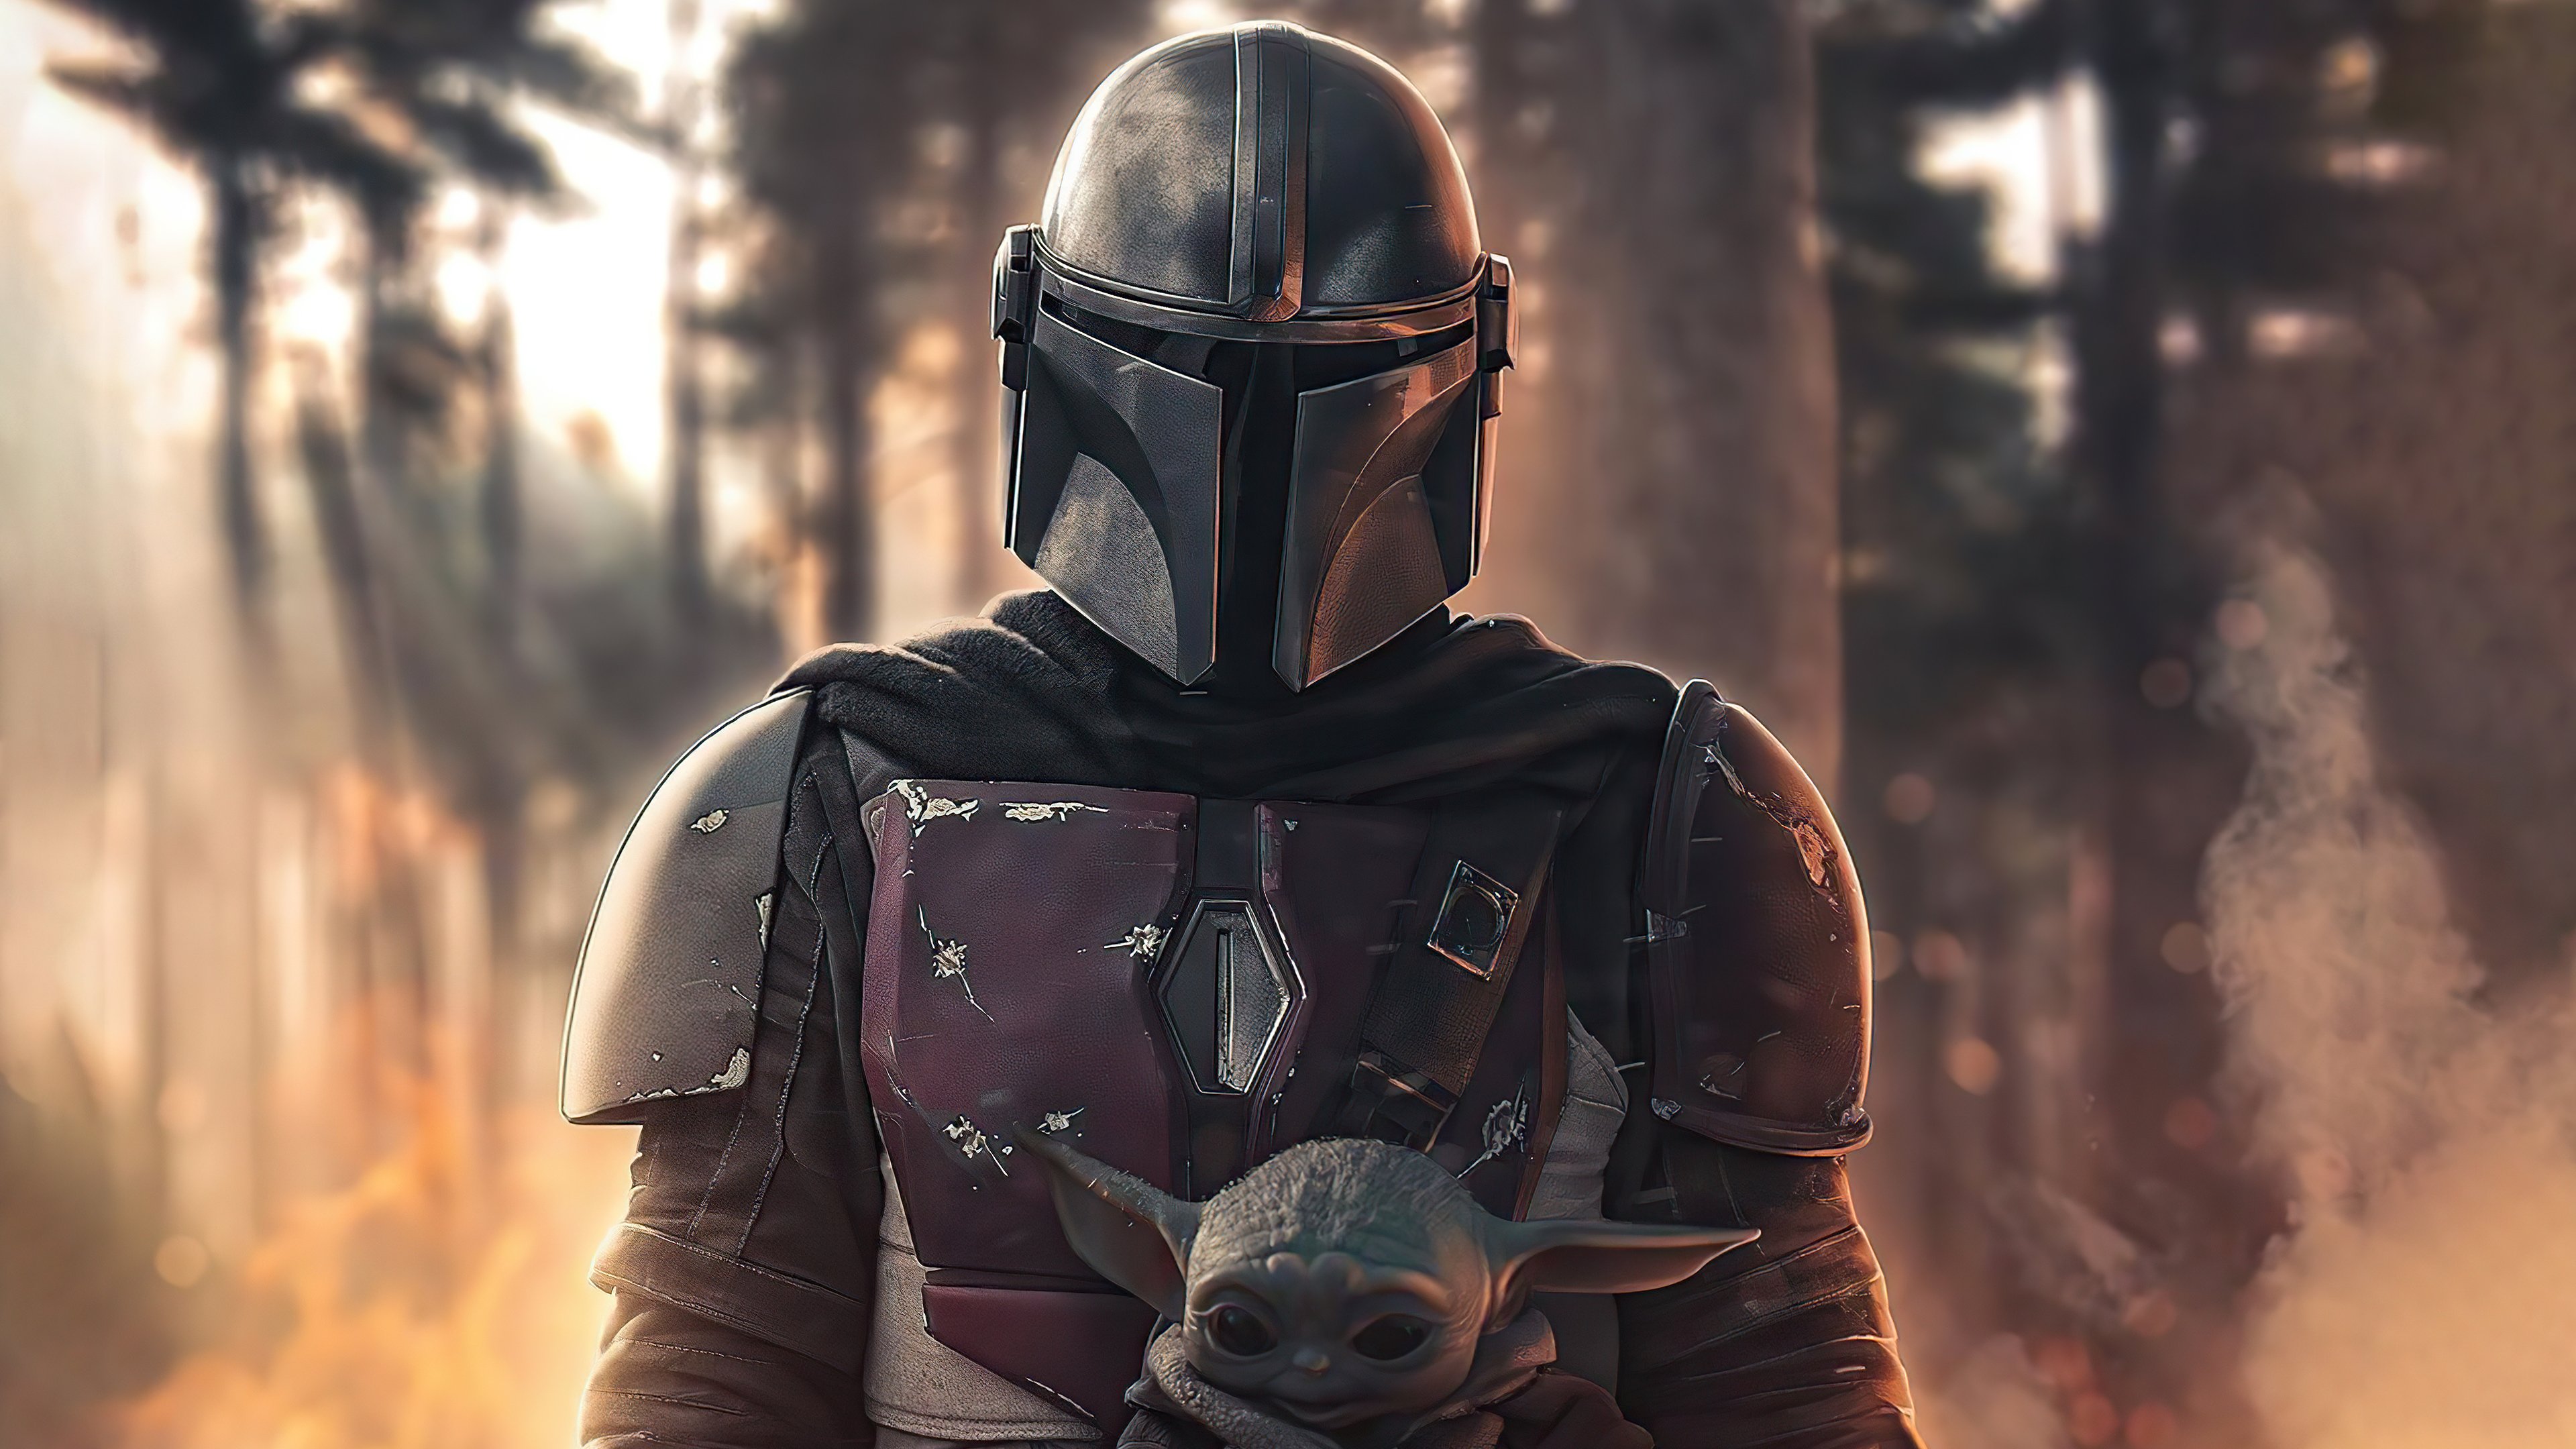 Removed the text from the new Dark Saber Mandalorian Season 3 poster to  make a Mobile Wallpaper  riphonewallpapers